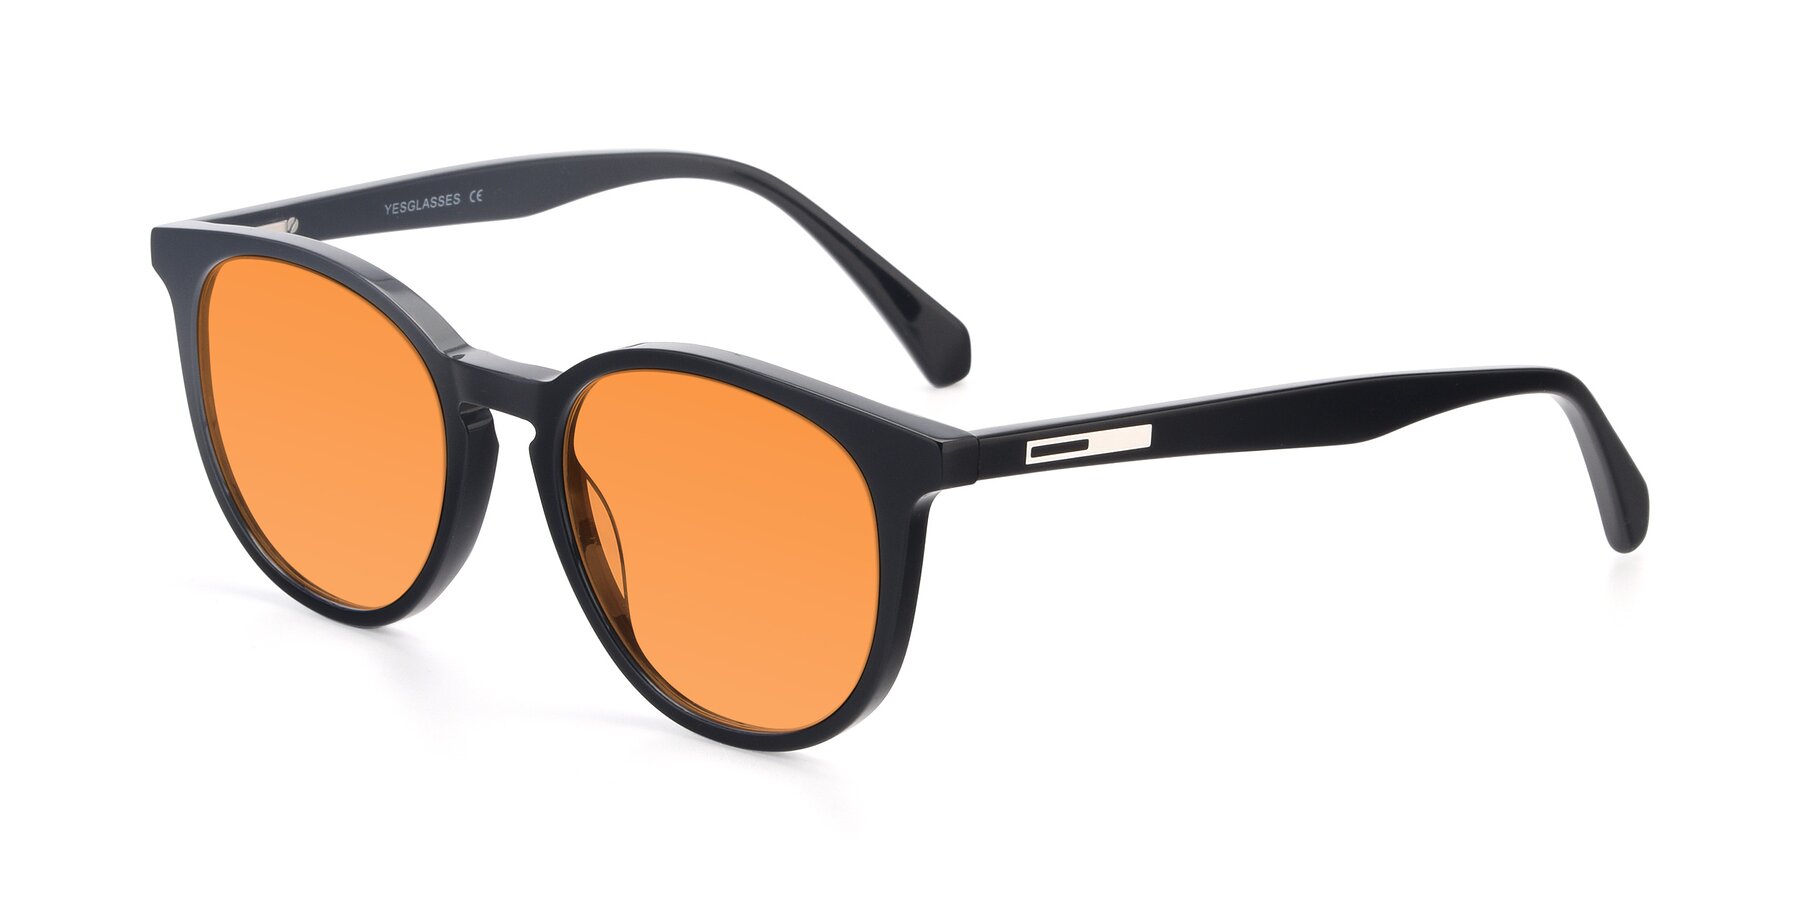 Angle of 17721 in Black with Orange Tinted Lenses